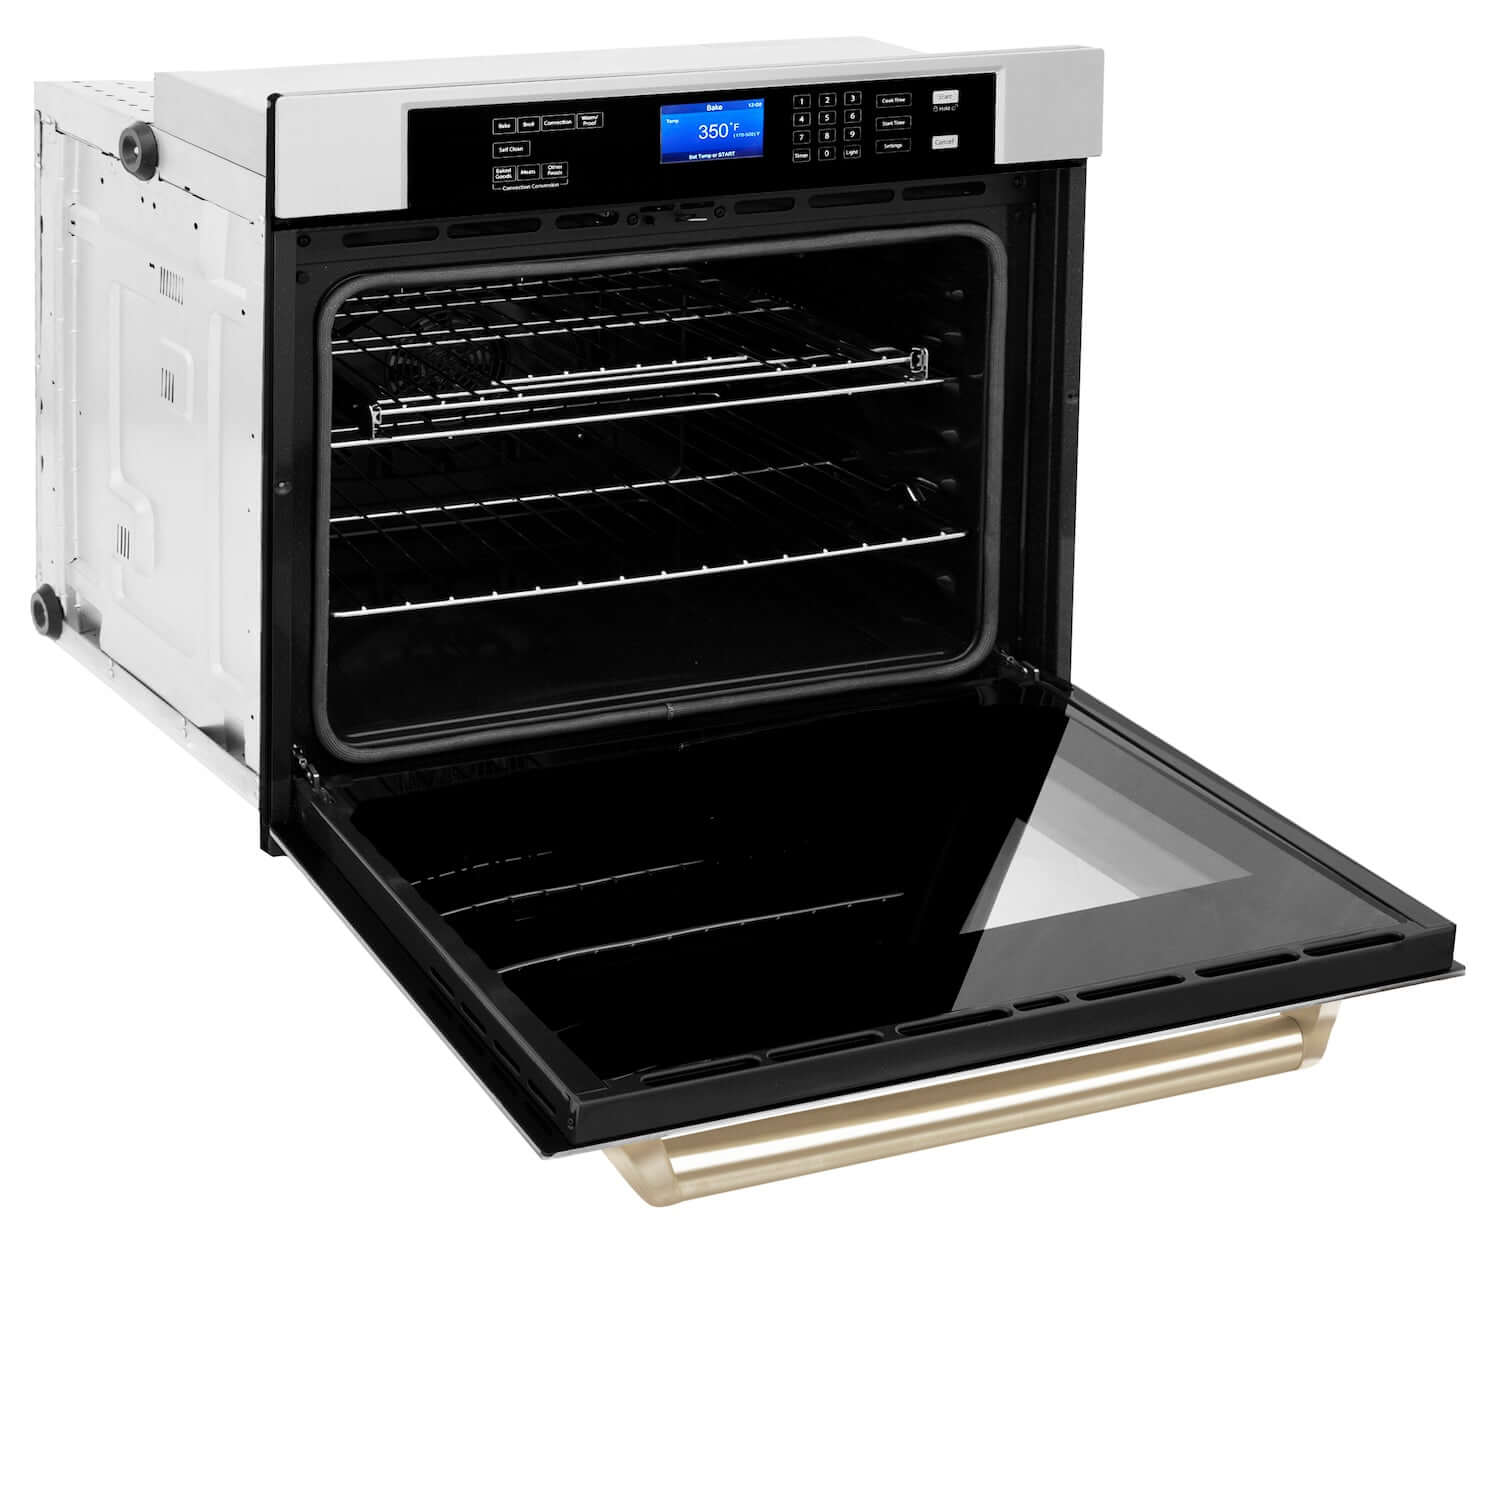 ZLINE Autograph Edition 30 in. Electric Single Wall Oven with Self Clean and True Convection in Stainless Steel and Polished Gold Accents (AWSZ-30-G)-Wall Ovens-AWSZ-30-G ZLINE Kitchen and Bath